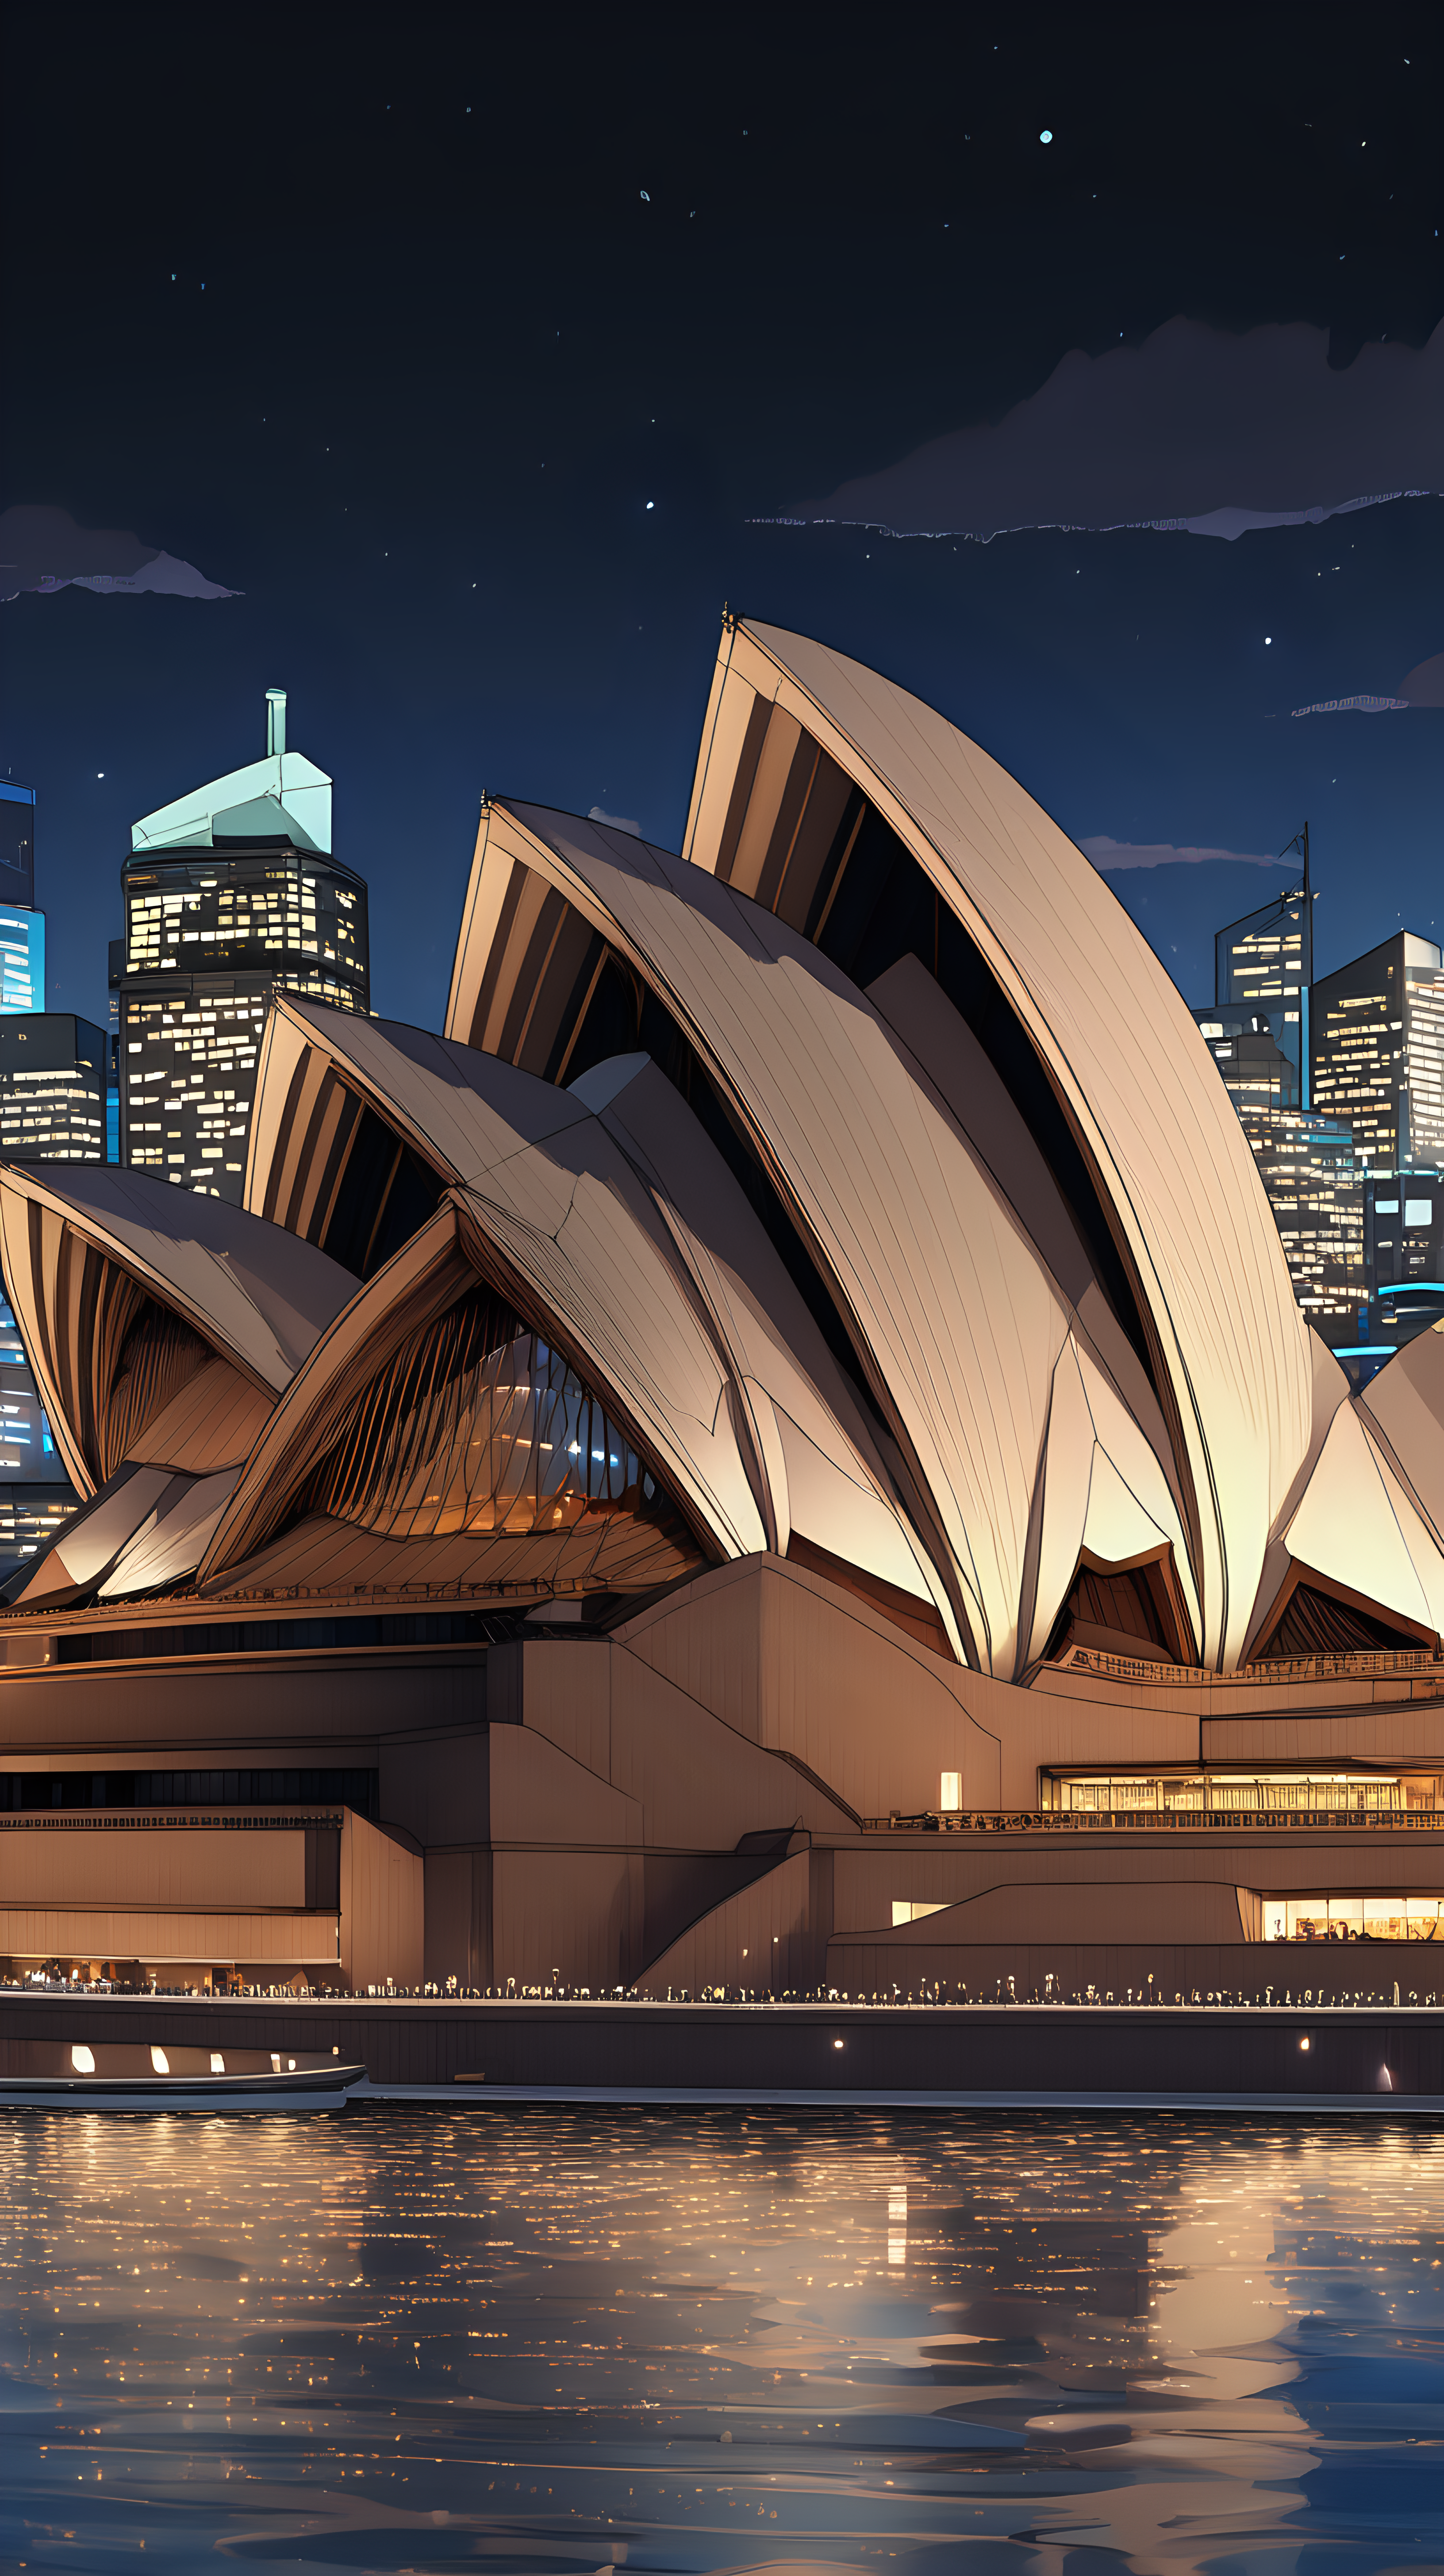 Imagine we're prompting, a detailed and beautiful anime-inspired scene of the Sydney Opera House. Capture the iconic architecture and intricate details with a high-quality camera model and lens. Illuminate the scene with soft, atmospheric lighting, bringing out the beauty of this landmark in an anime-style composition.